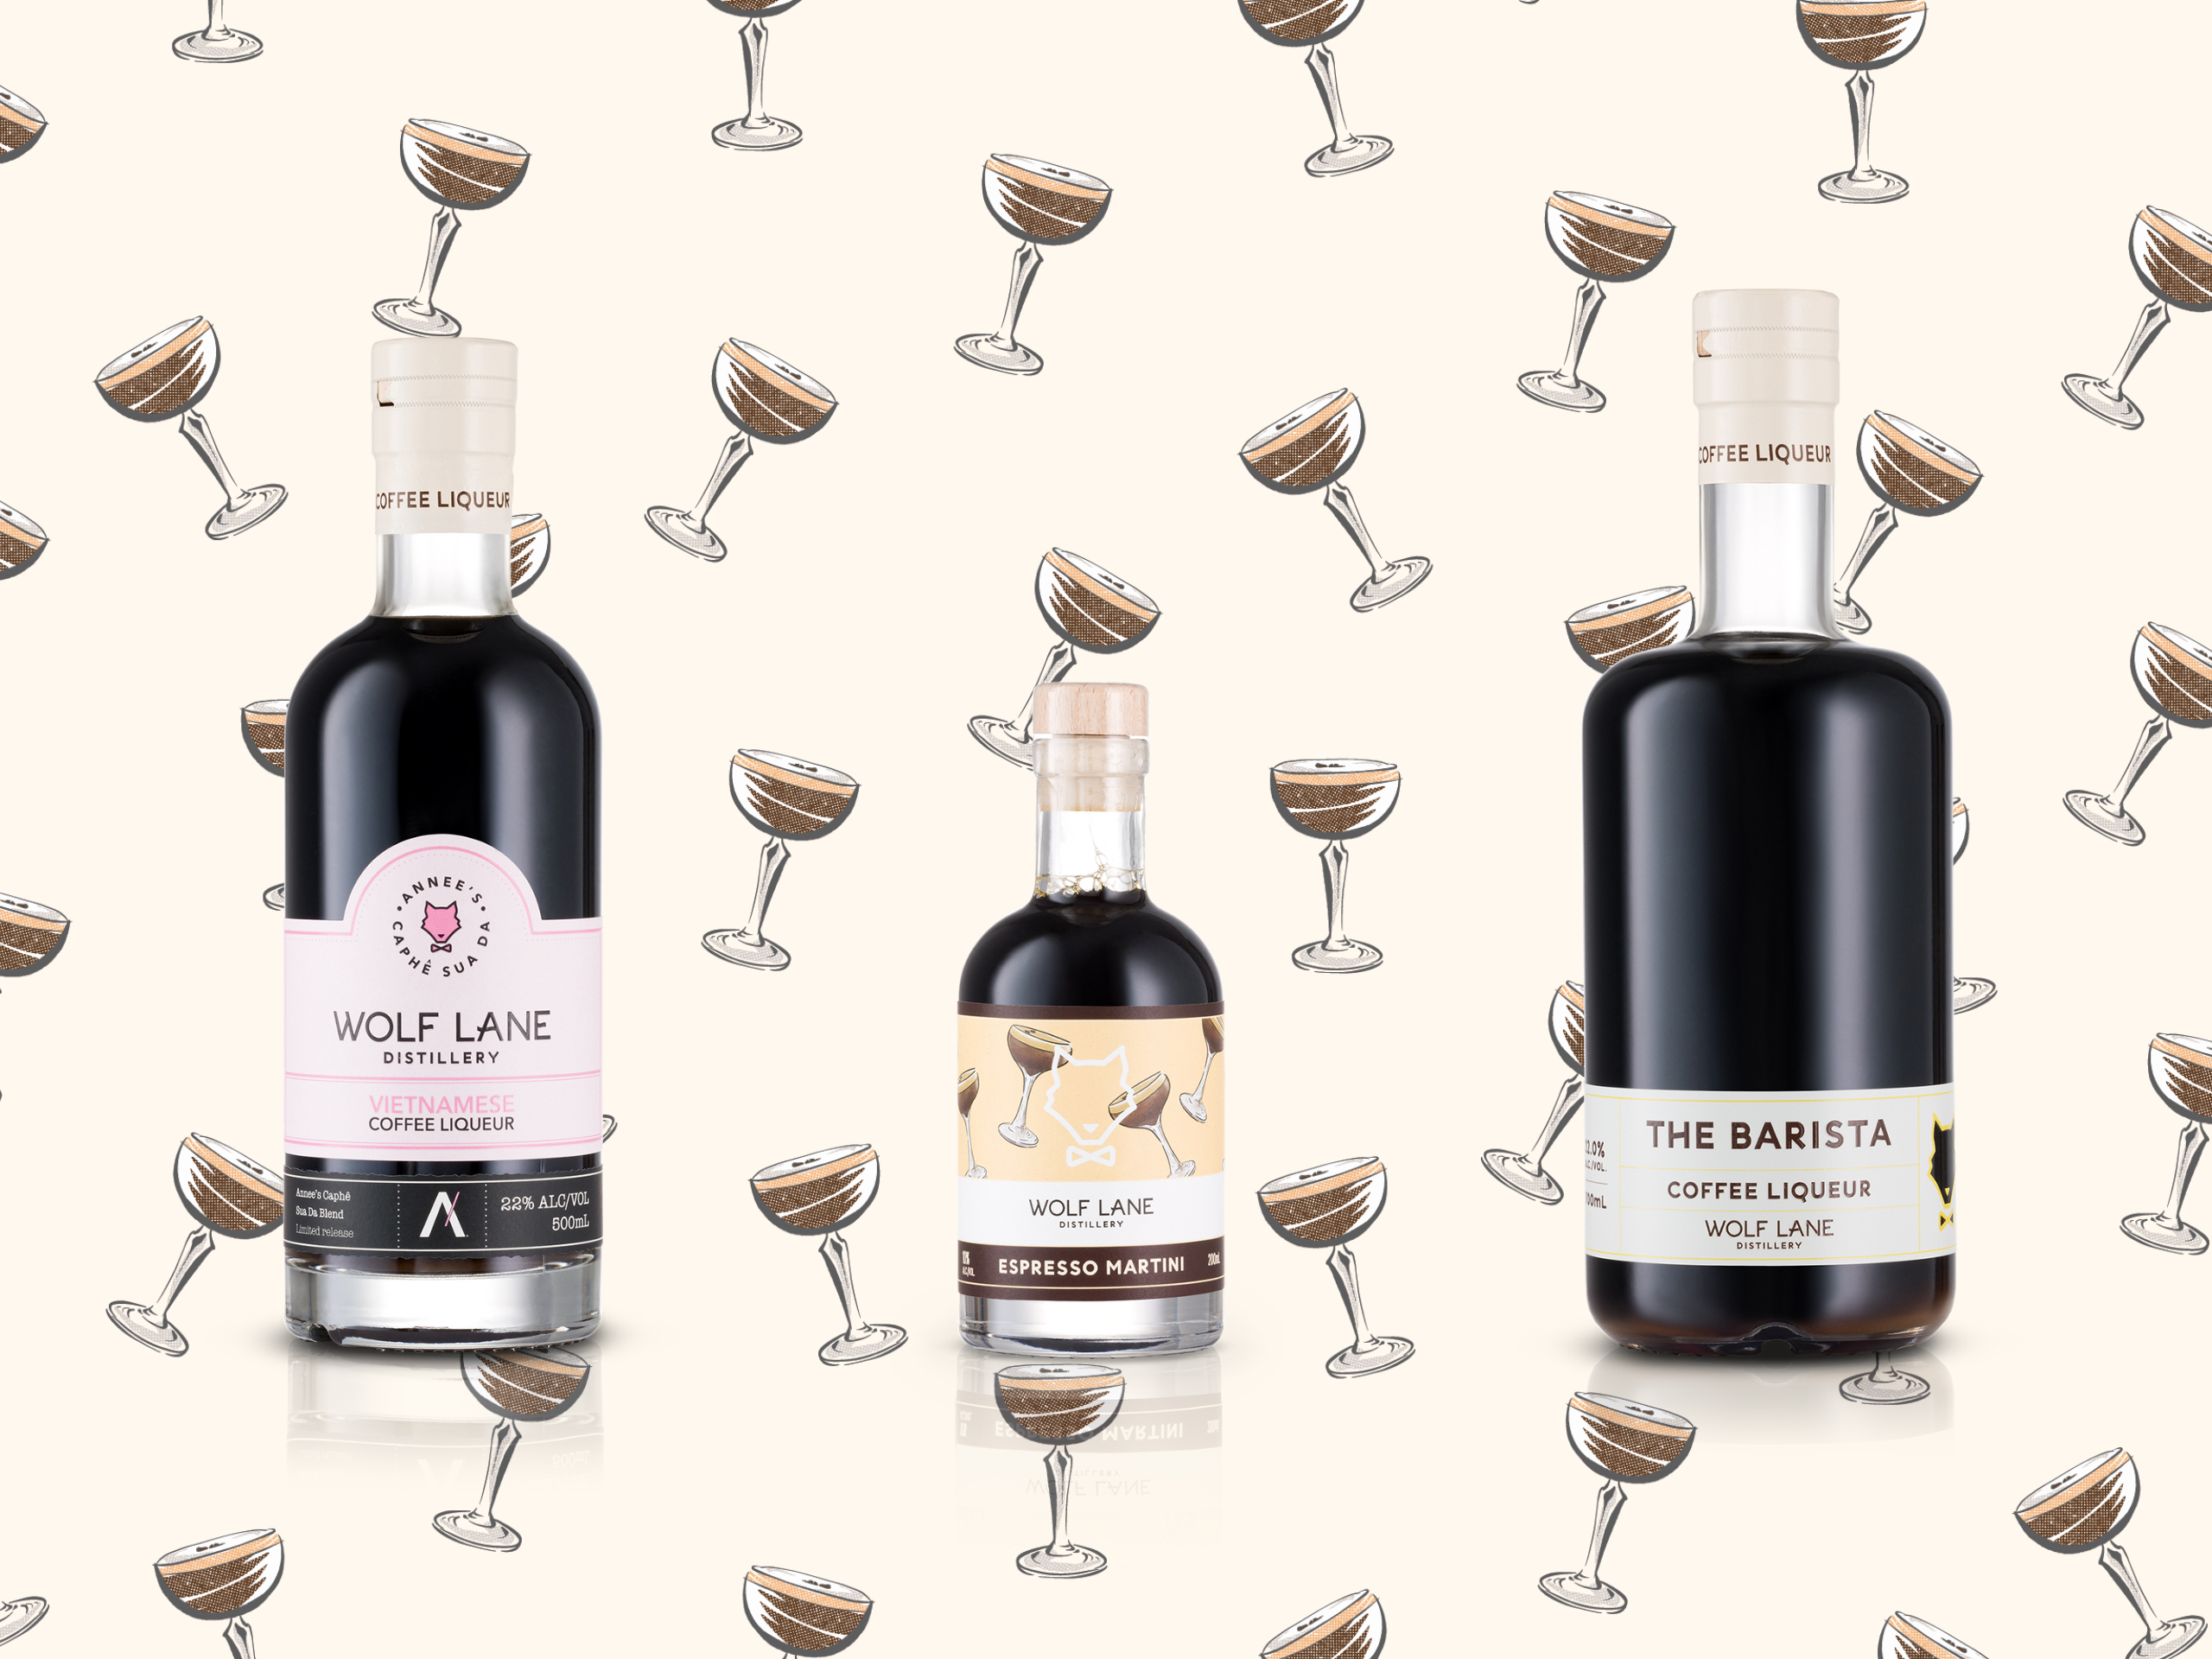 The best ways to enjoy your favourite Coffee Liqueur